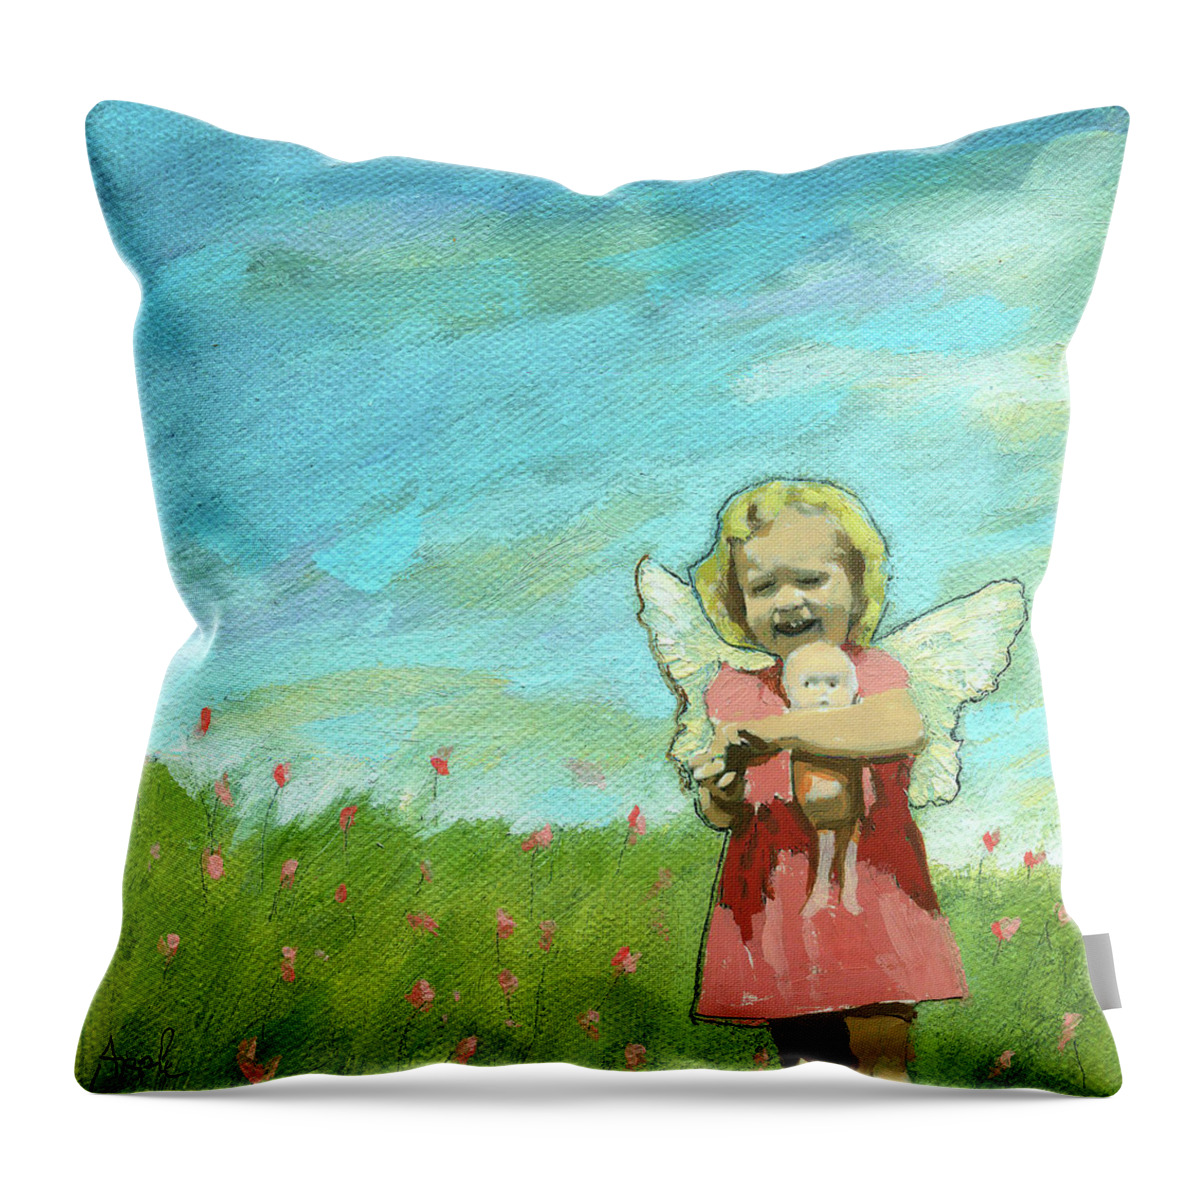 Angel Throw Pillow featuring the mixed media Little Angel by Linda Apple